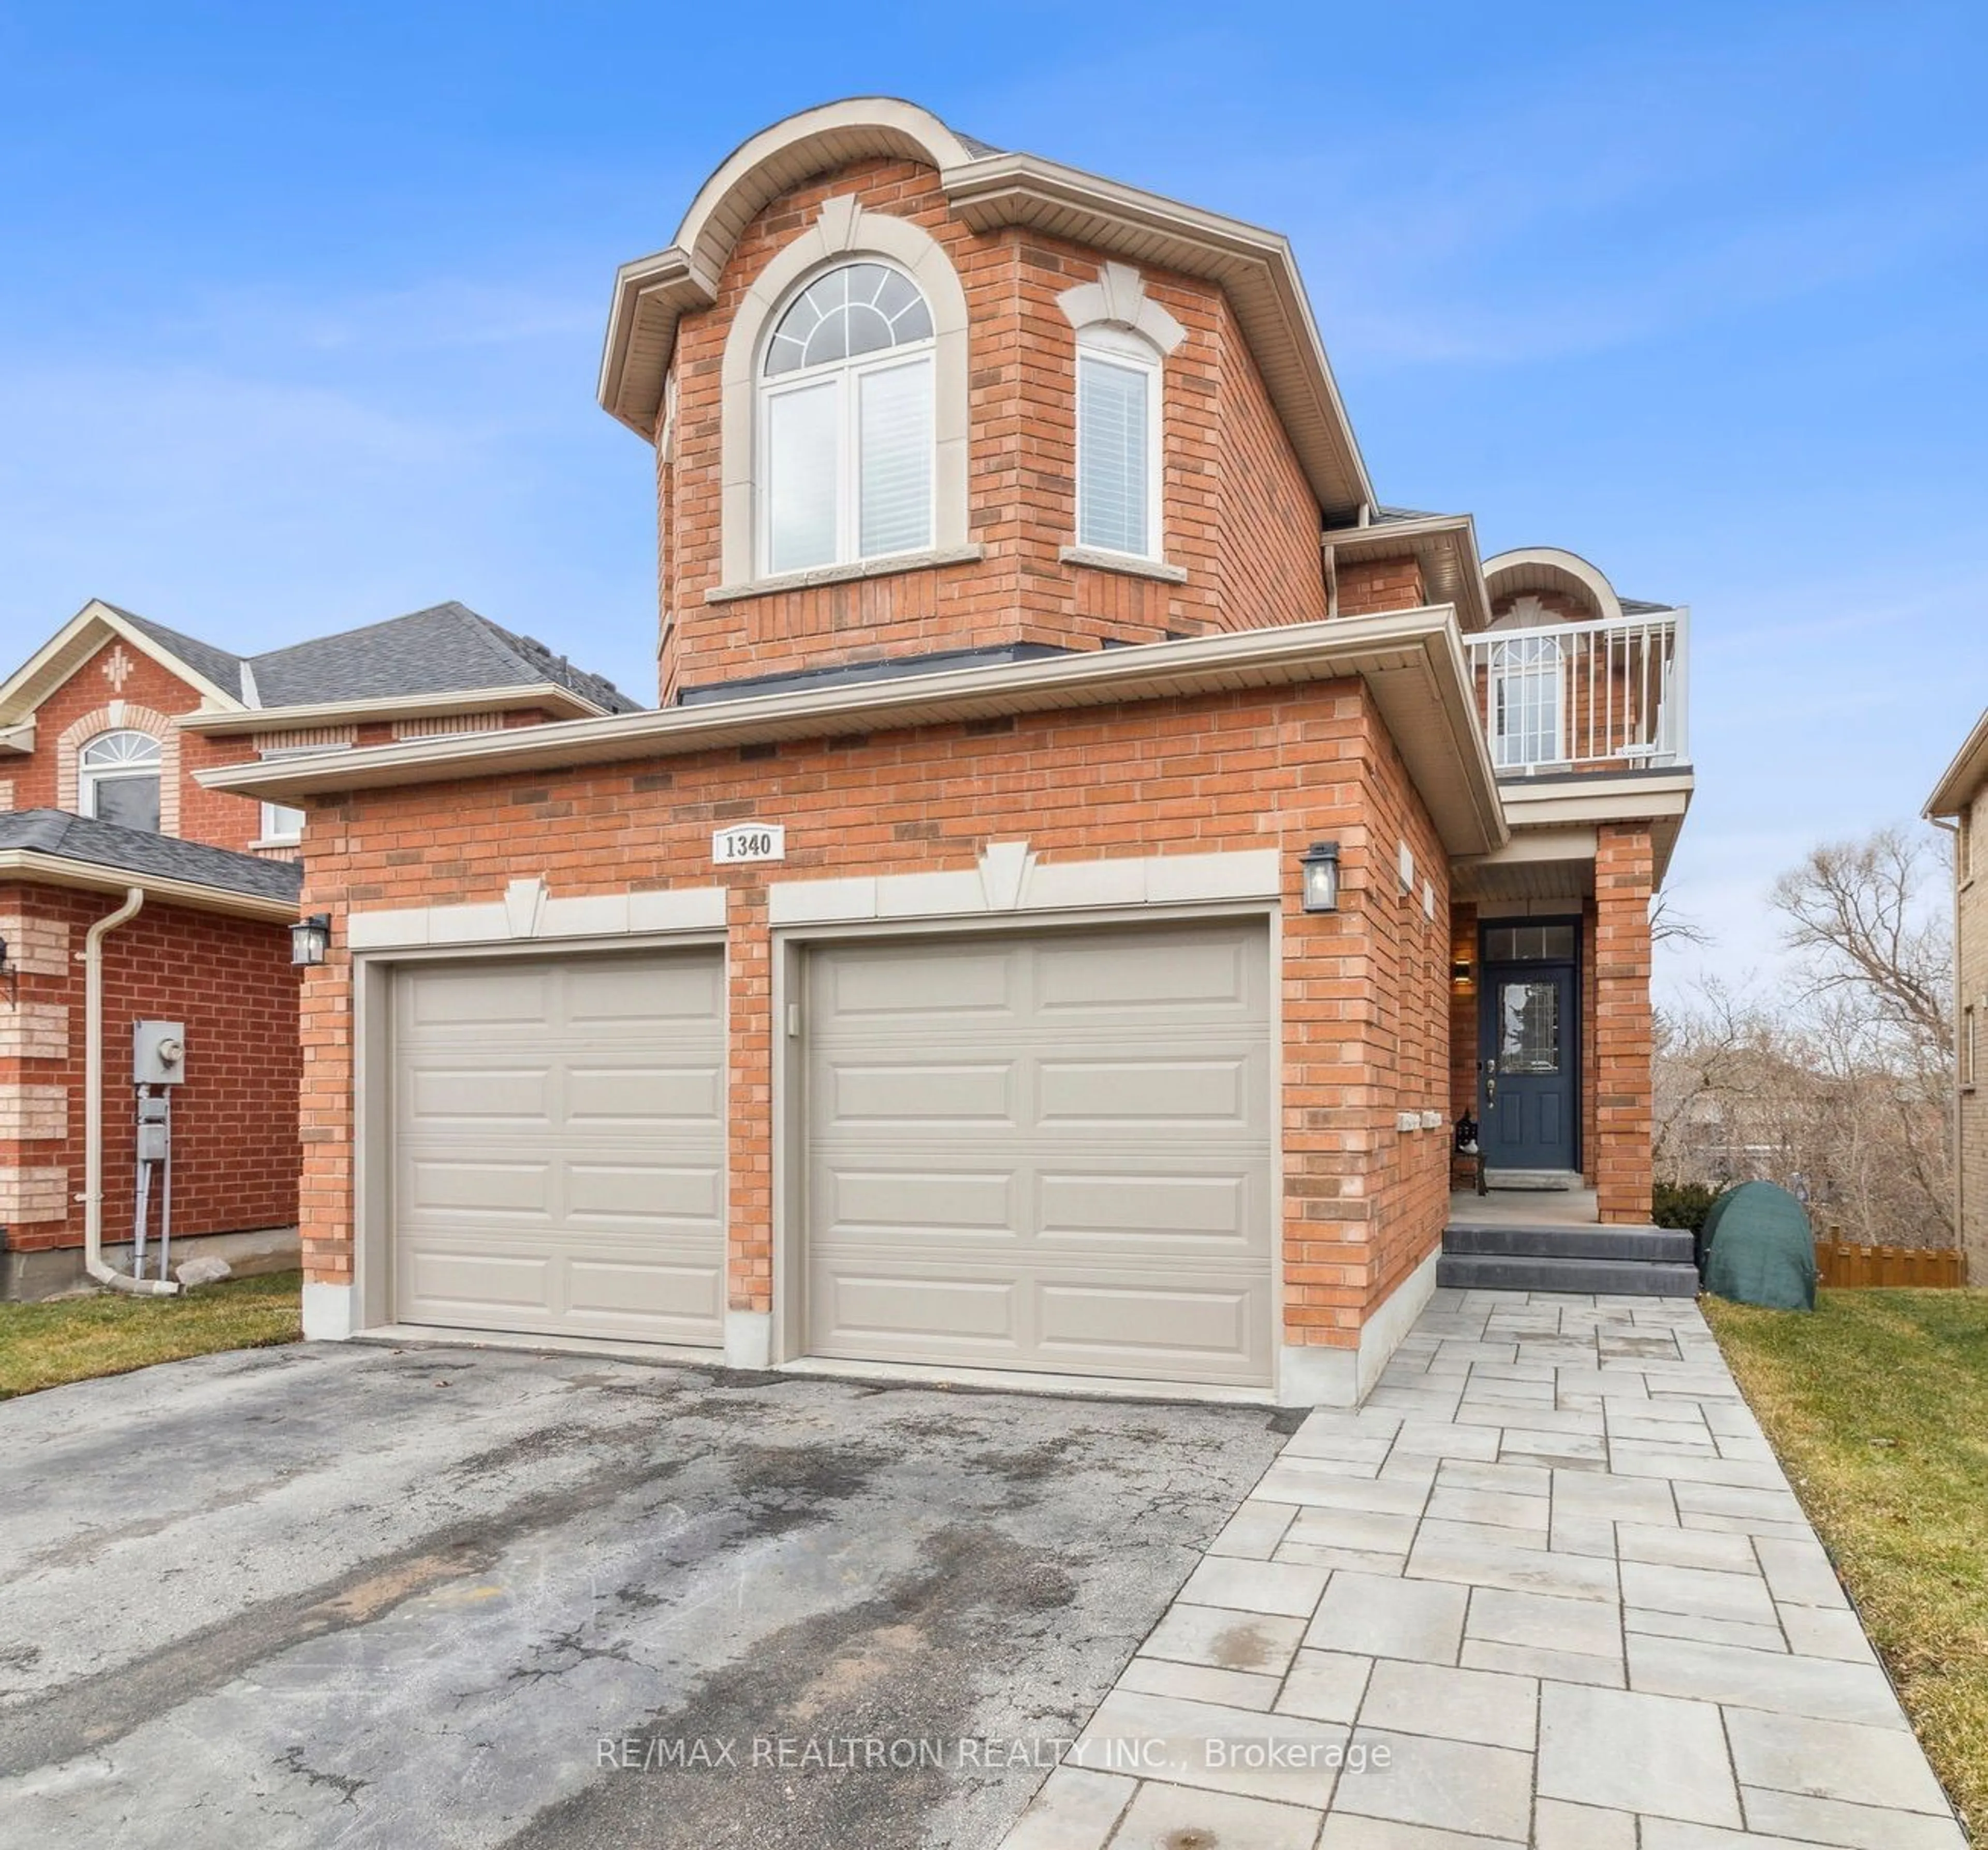 Home with brick exterior material for 1340 Fox Hill St, Innisfil Ontario L9S 4Y6